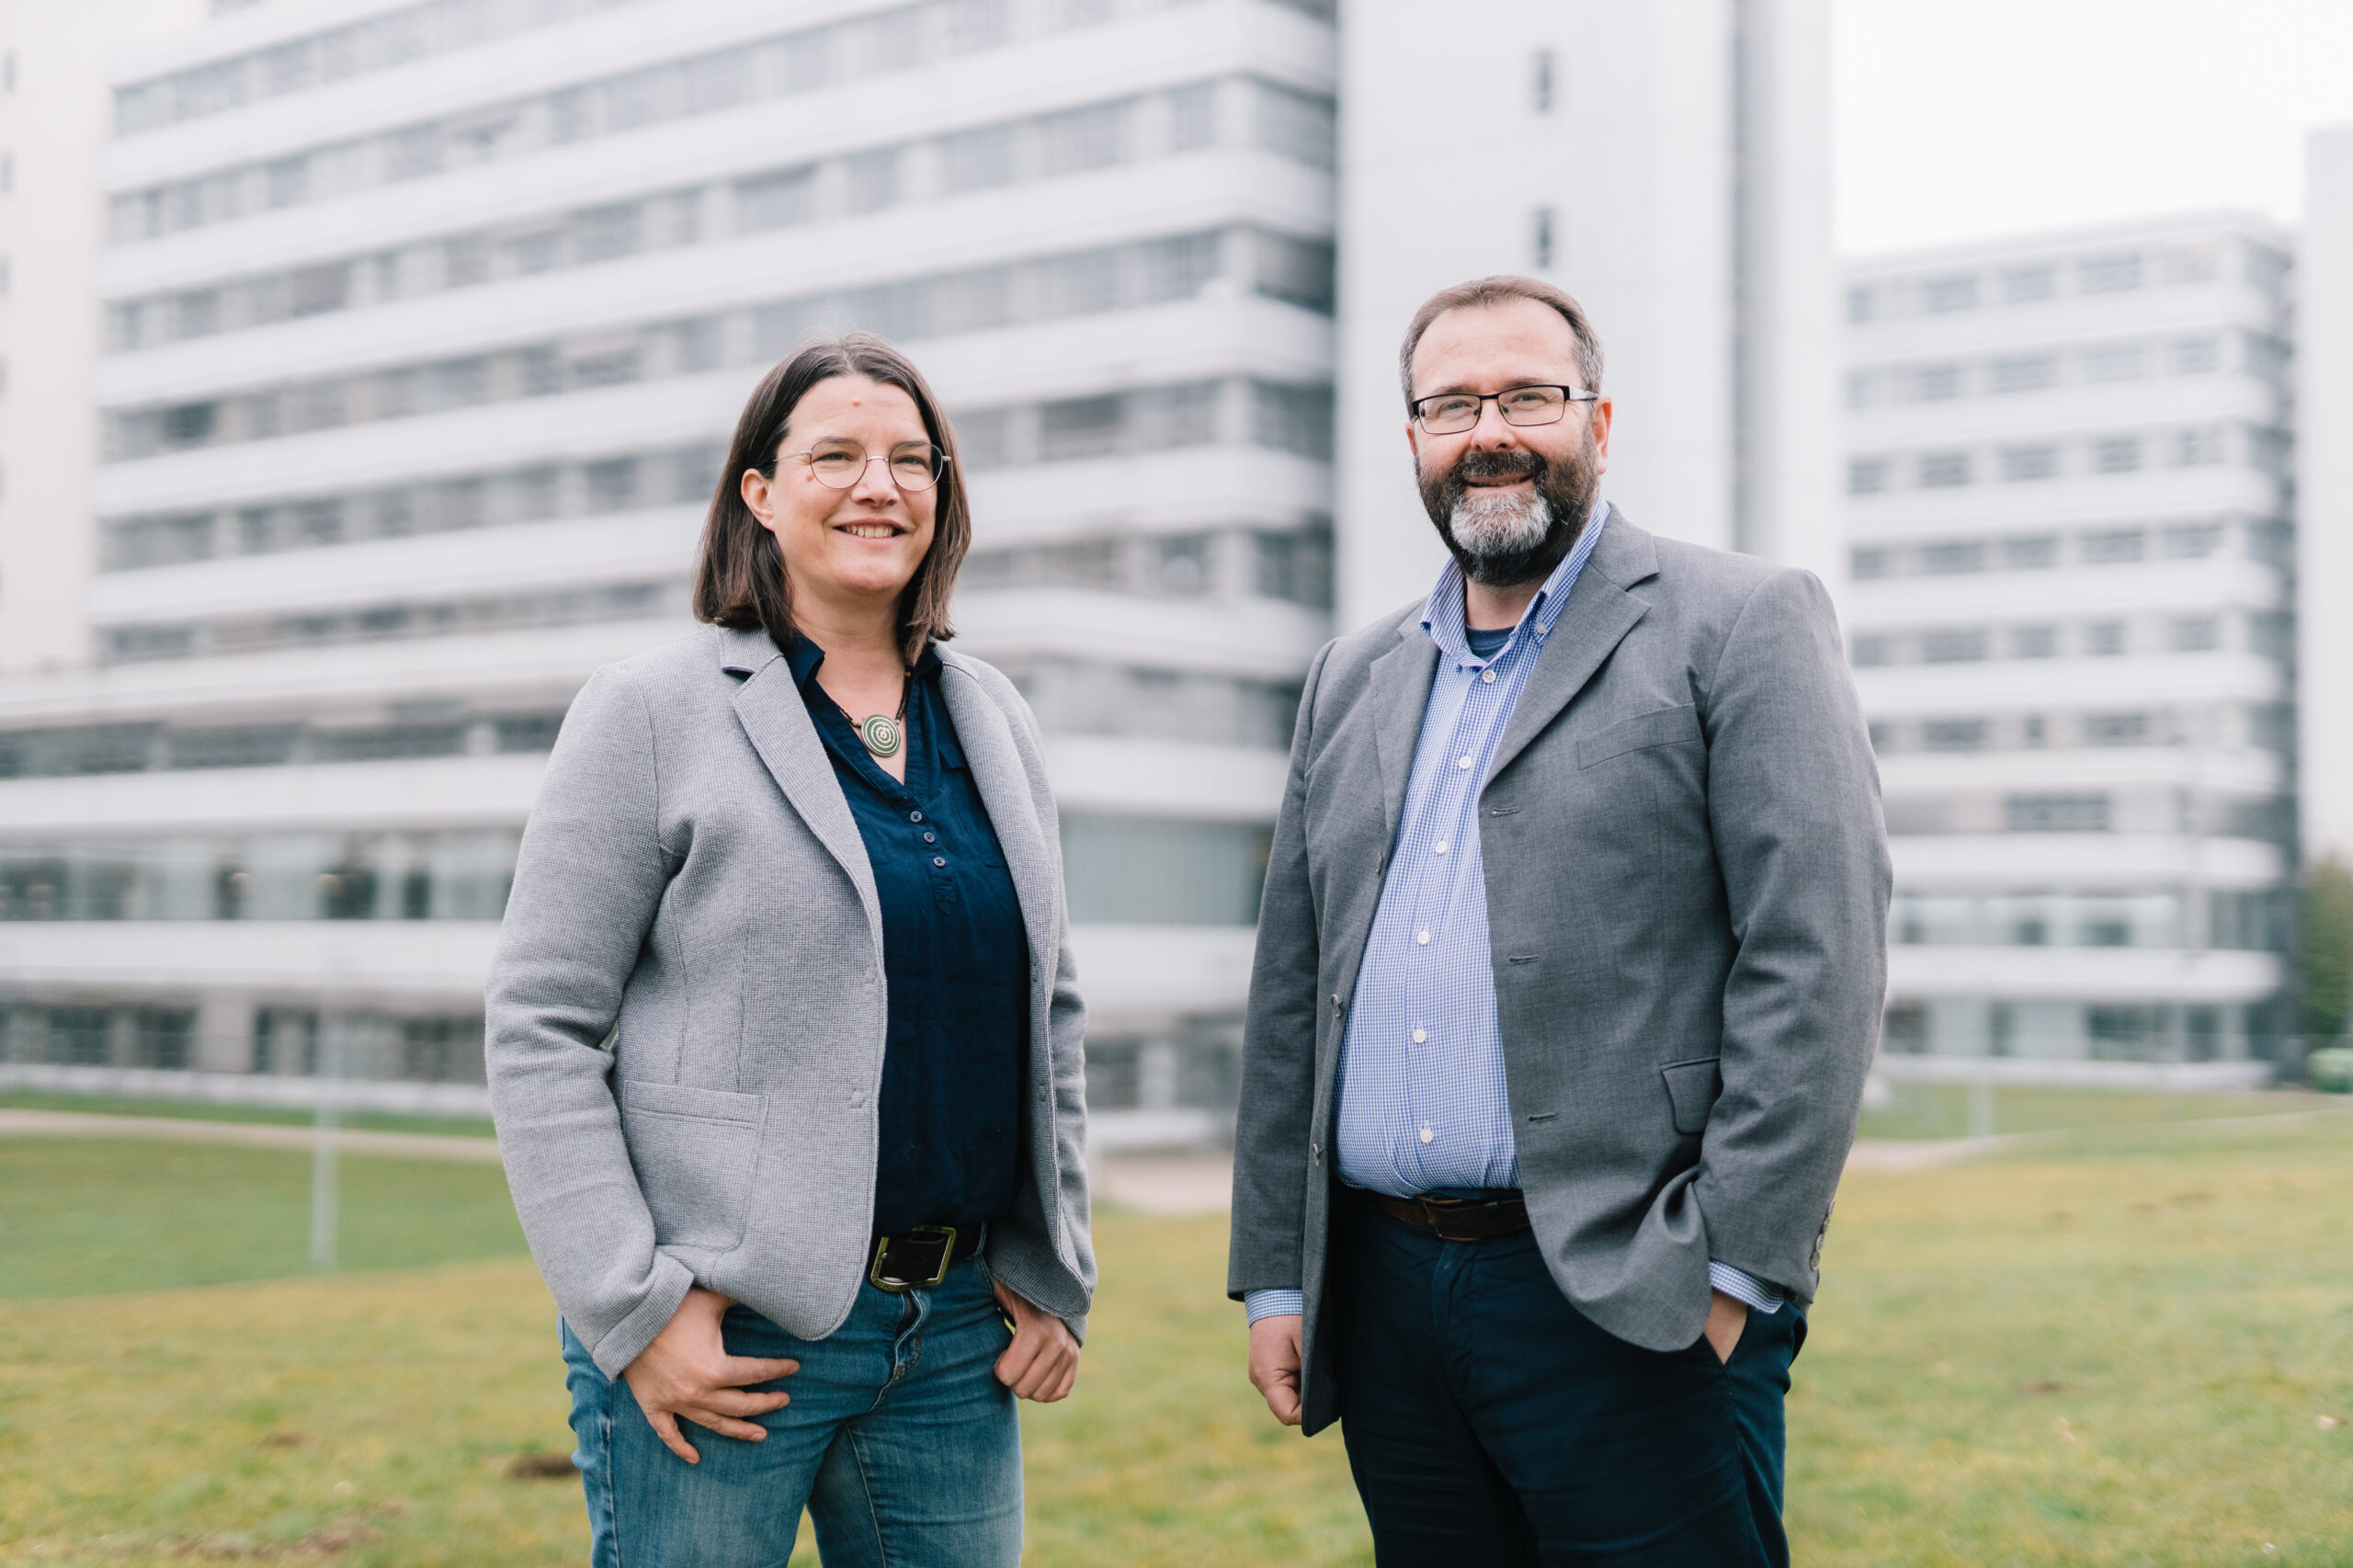 Professor Dr Barbara Caspers and Professor Dr Oliver Krüger are responsible for organizing Behaviour 2023, which will be hosted by Bielefeld University this summer.